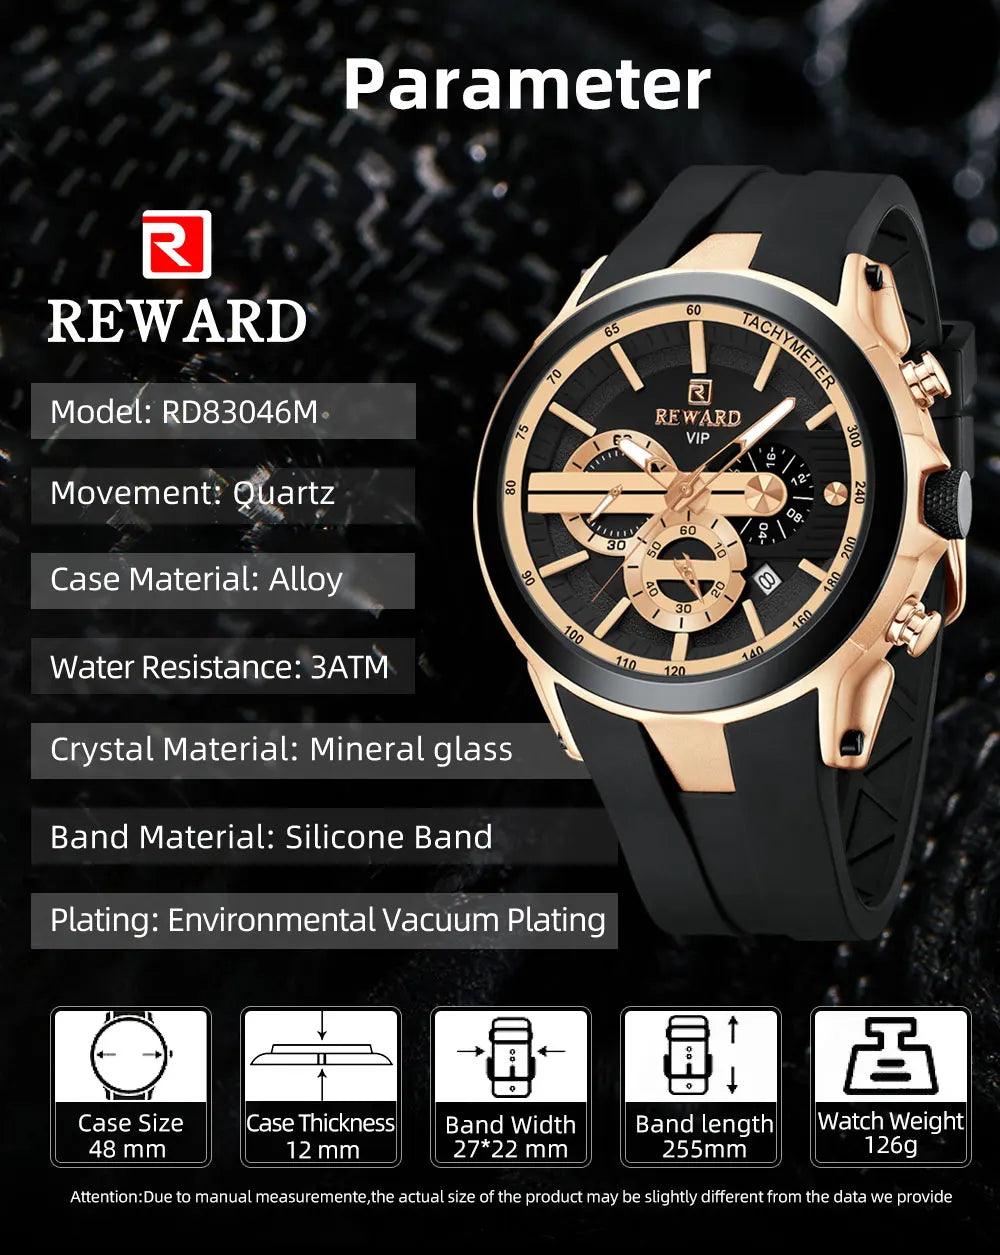 VIP Top Brand New Fashion Leather Strap Waterproof Luminous Chronograph Sport Watches for Men - Ideal Gifts - The Jewellery Supermarket